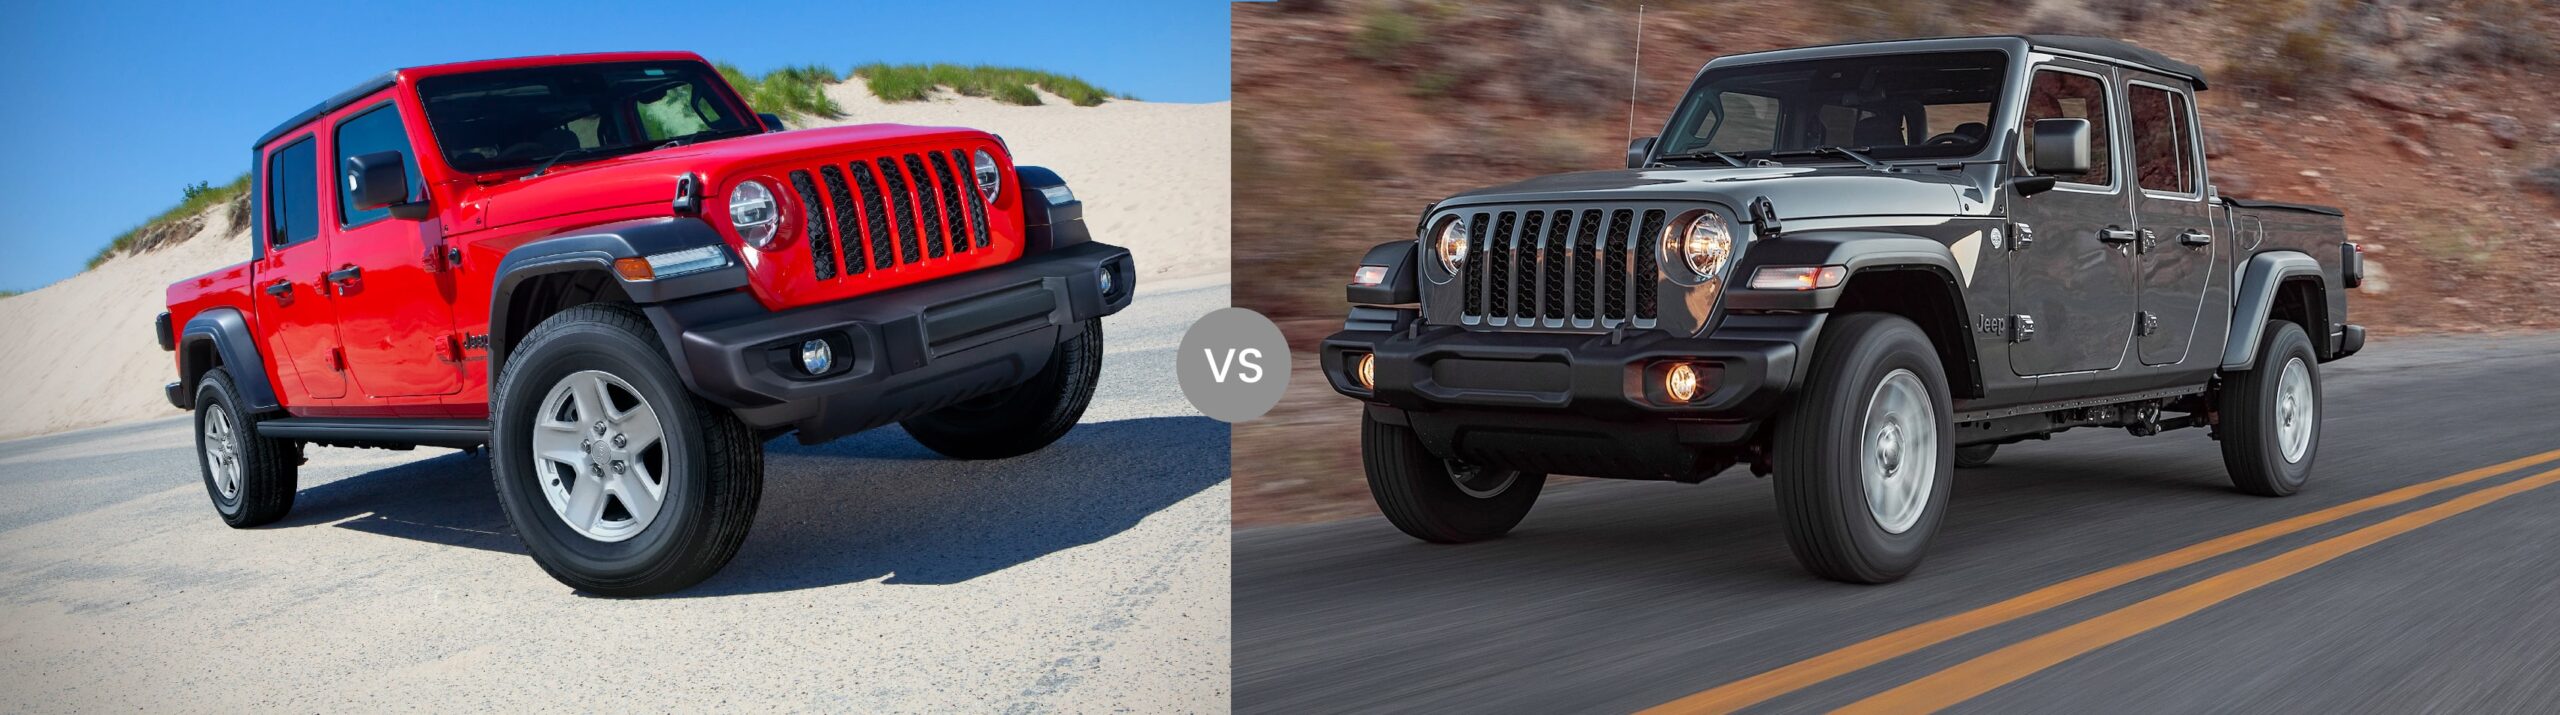 Jeep Gladiator Sport Vs Sport S: Discover the Key Differences